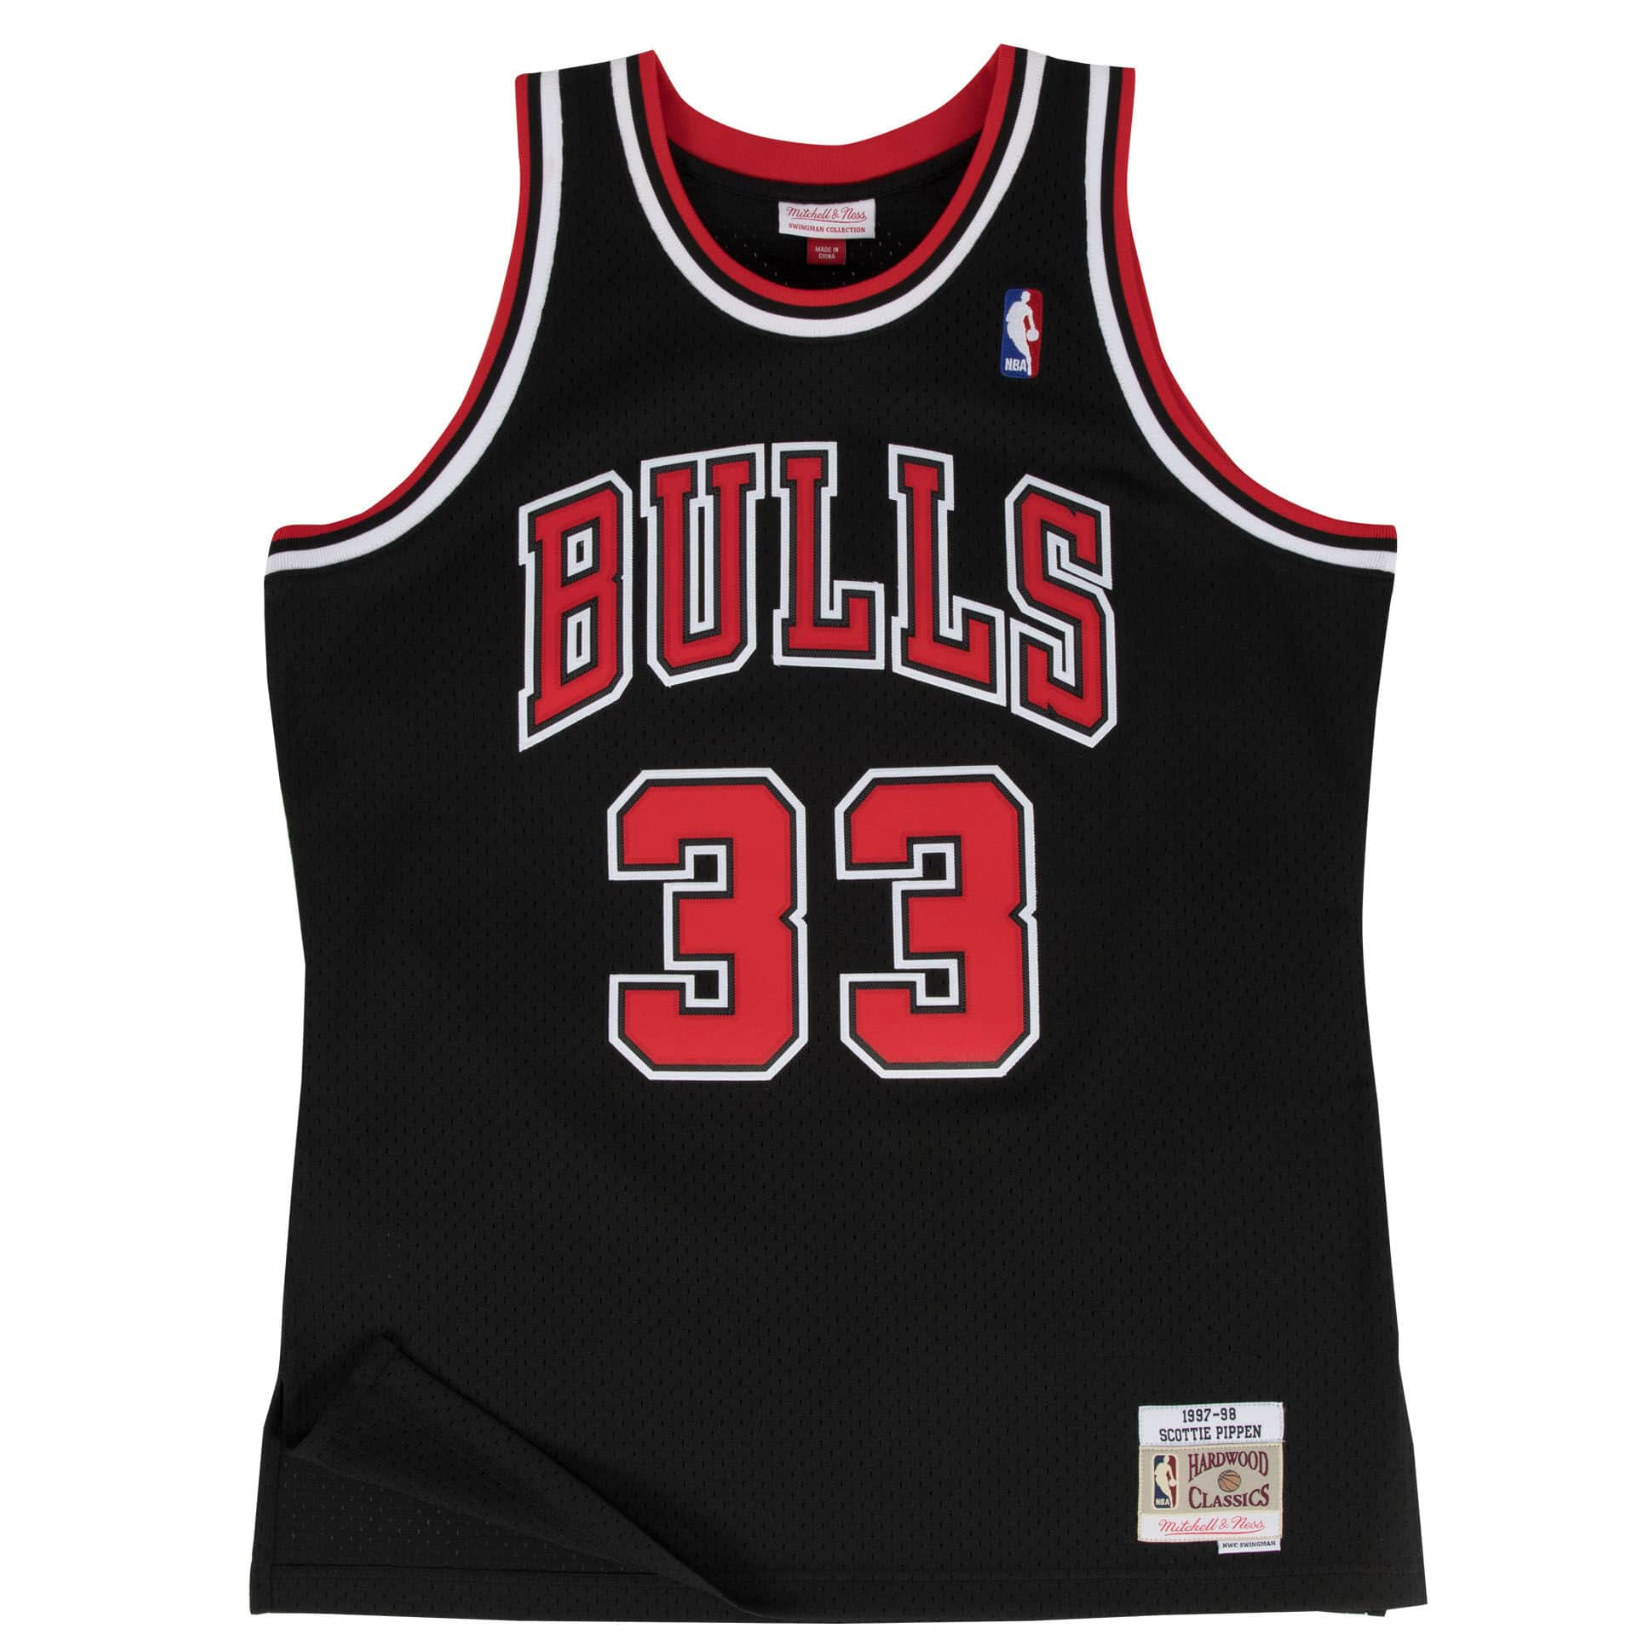 Scottie Pippen Chicago Bulls Mitchell & Ness NBA Jersey L Large Olive  #33 NWT